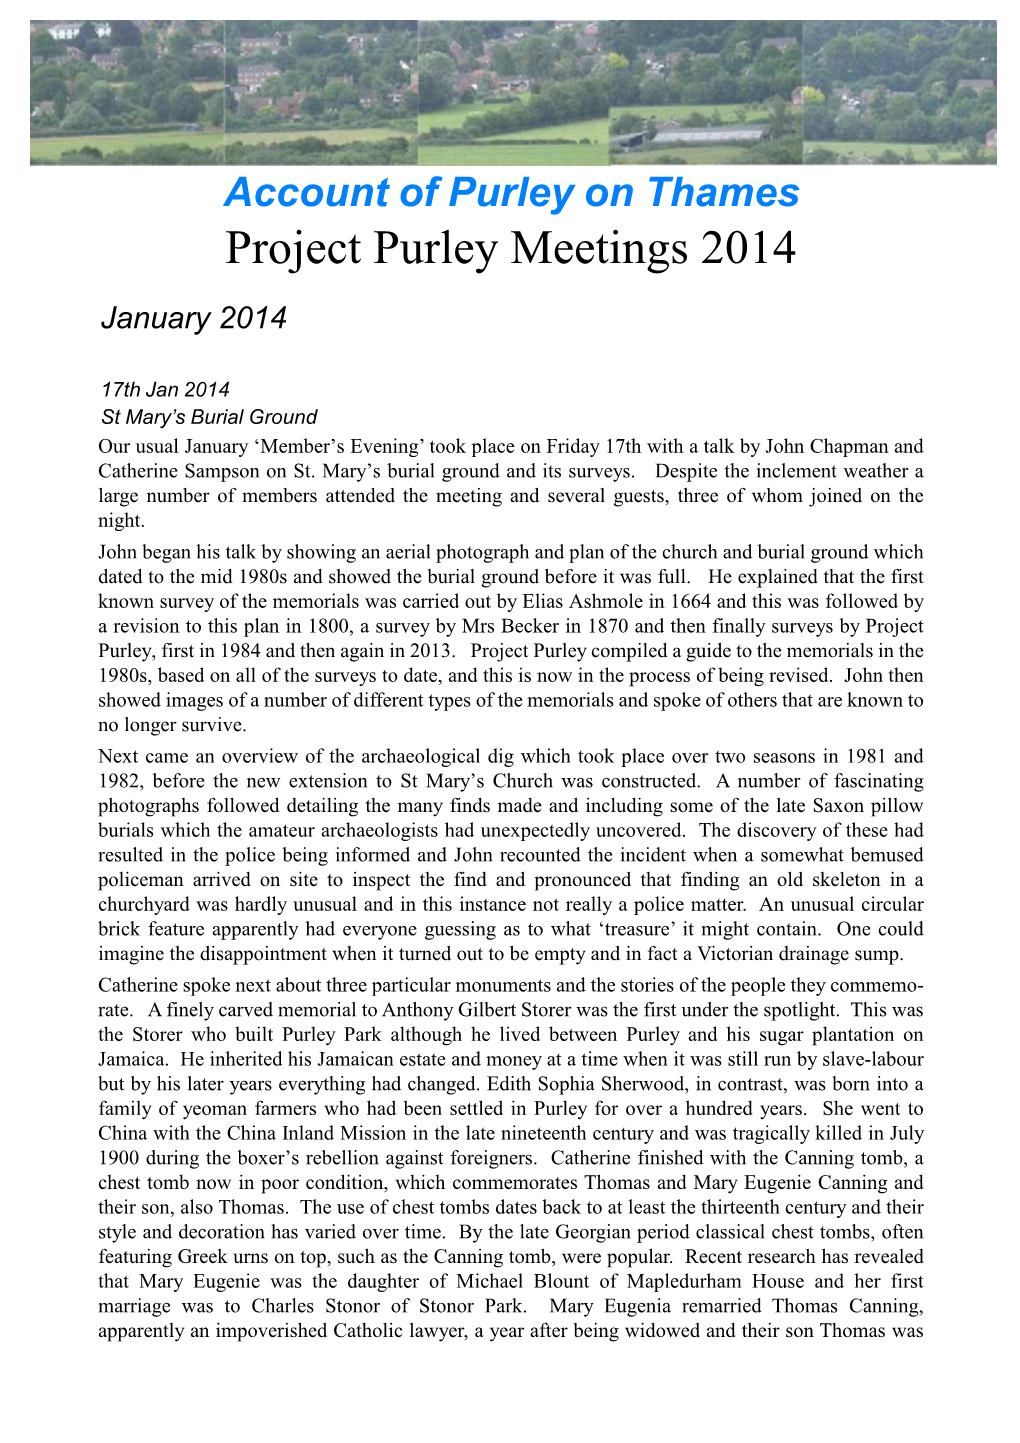 Project Purley Meetings 2014 January 2014